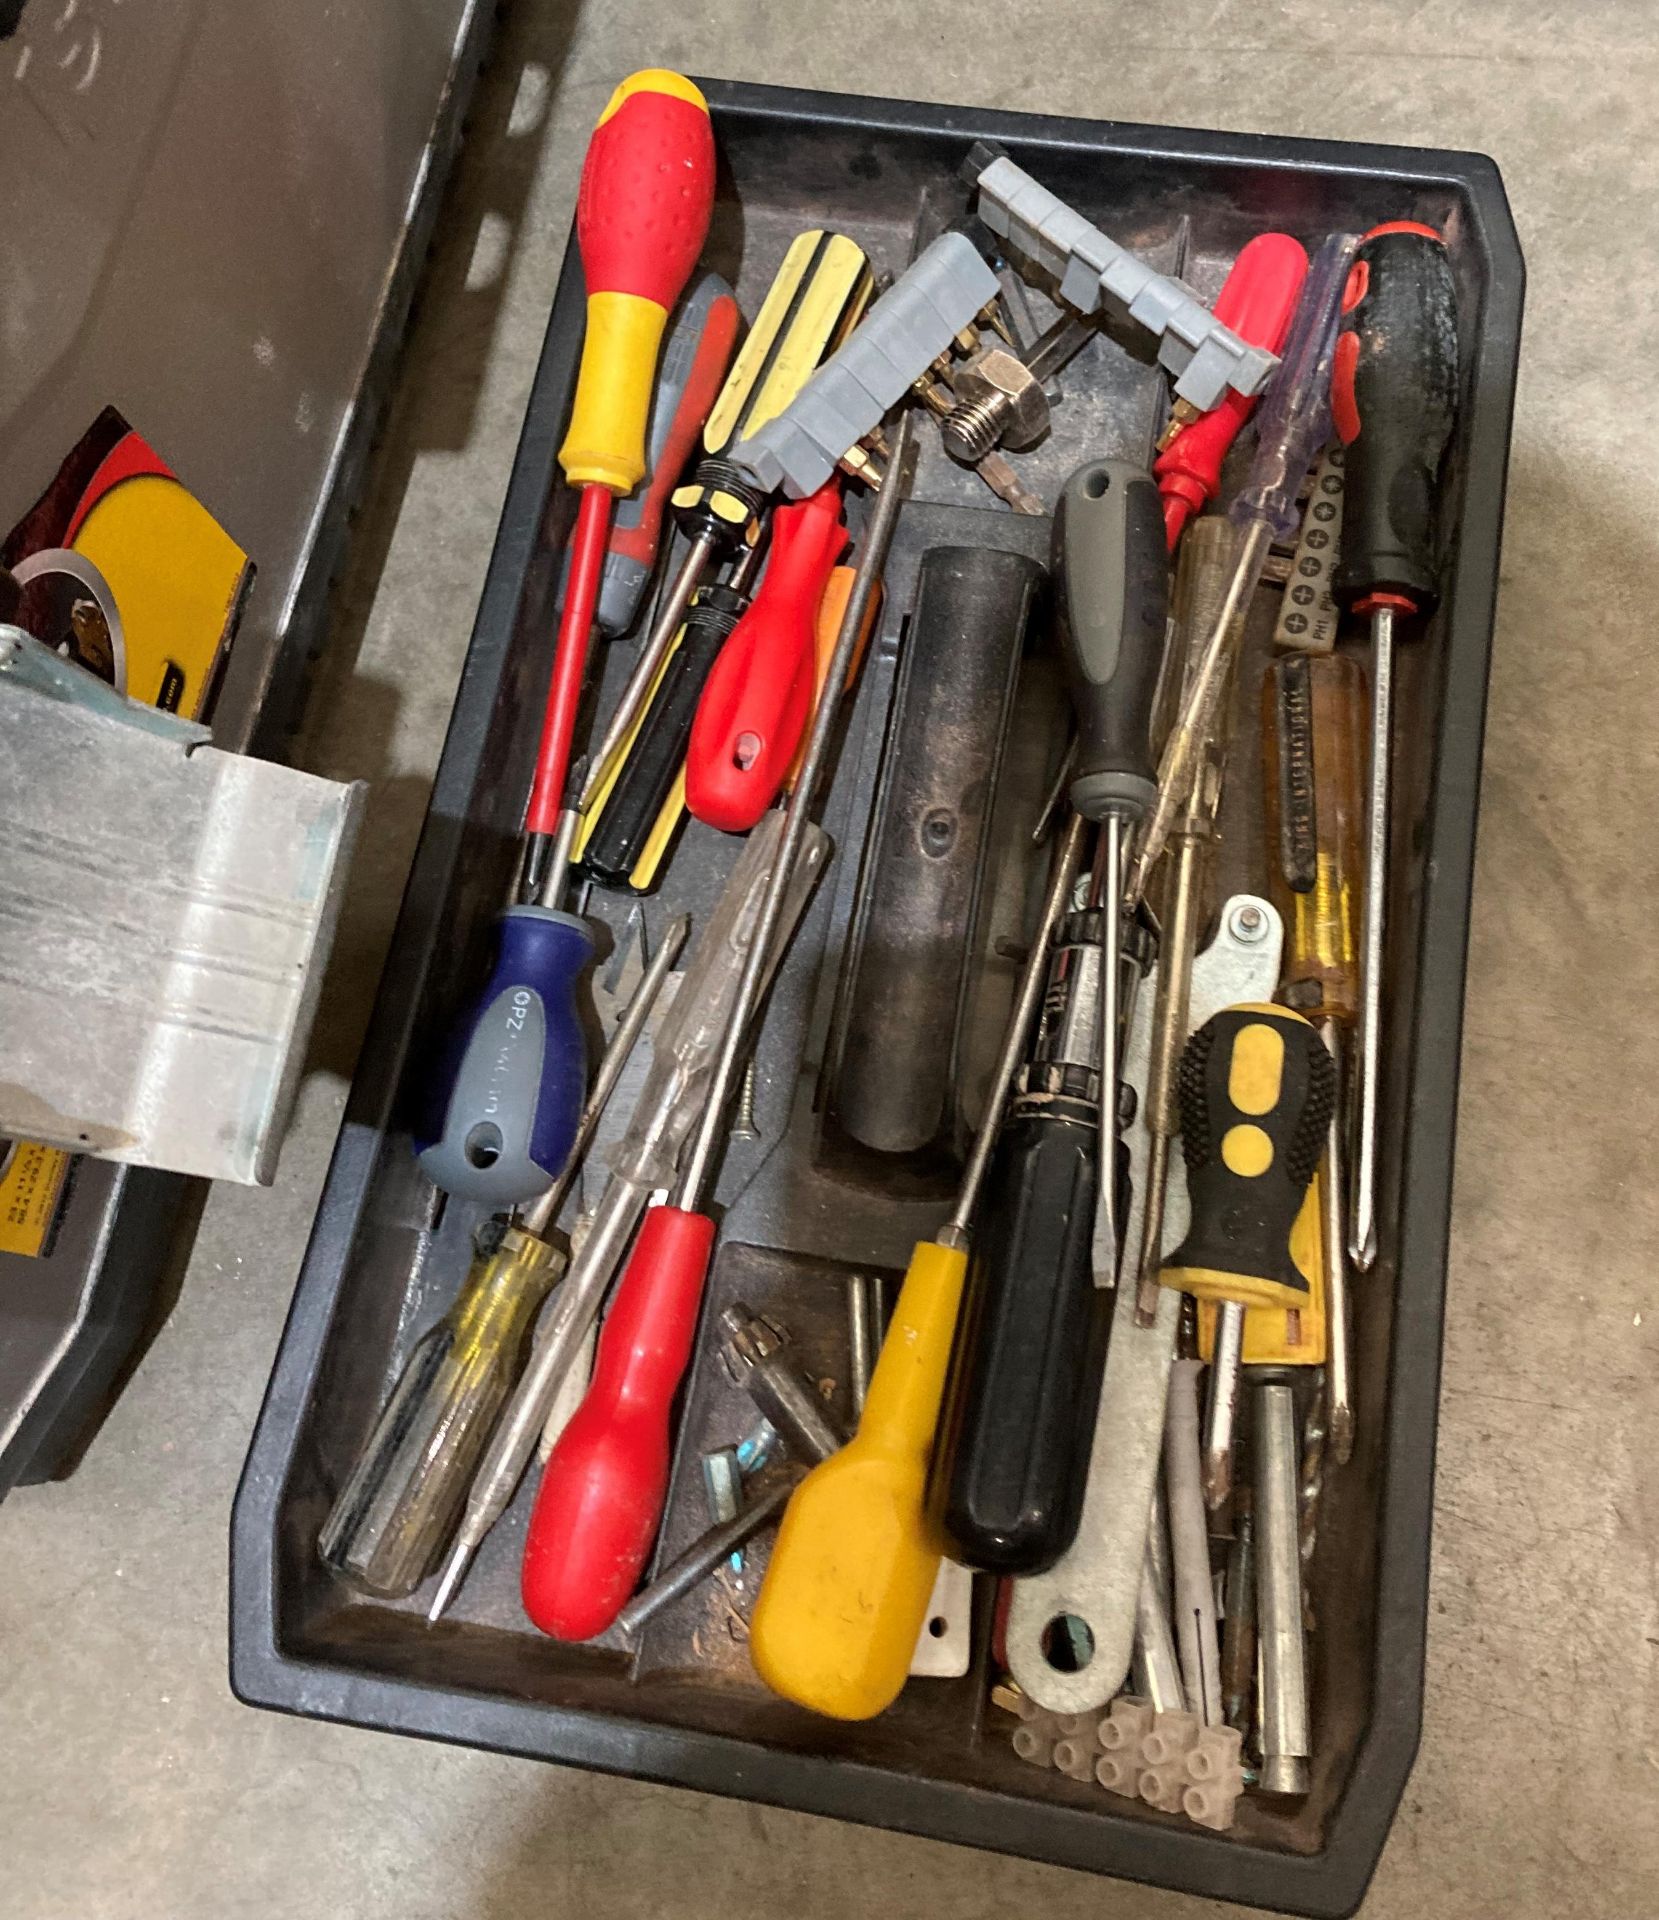 3 x assorted tool boxes including a Stanley Fat max and contents - assorted hand tools, - Image 2 of 5